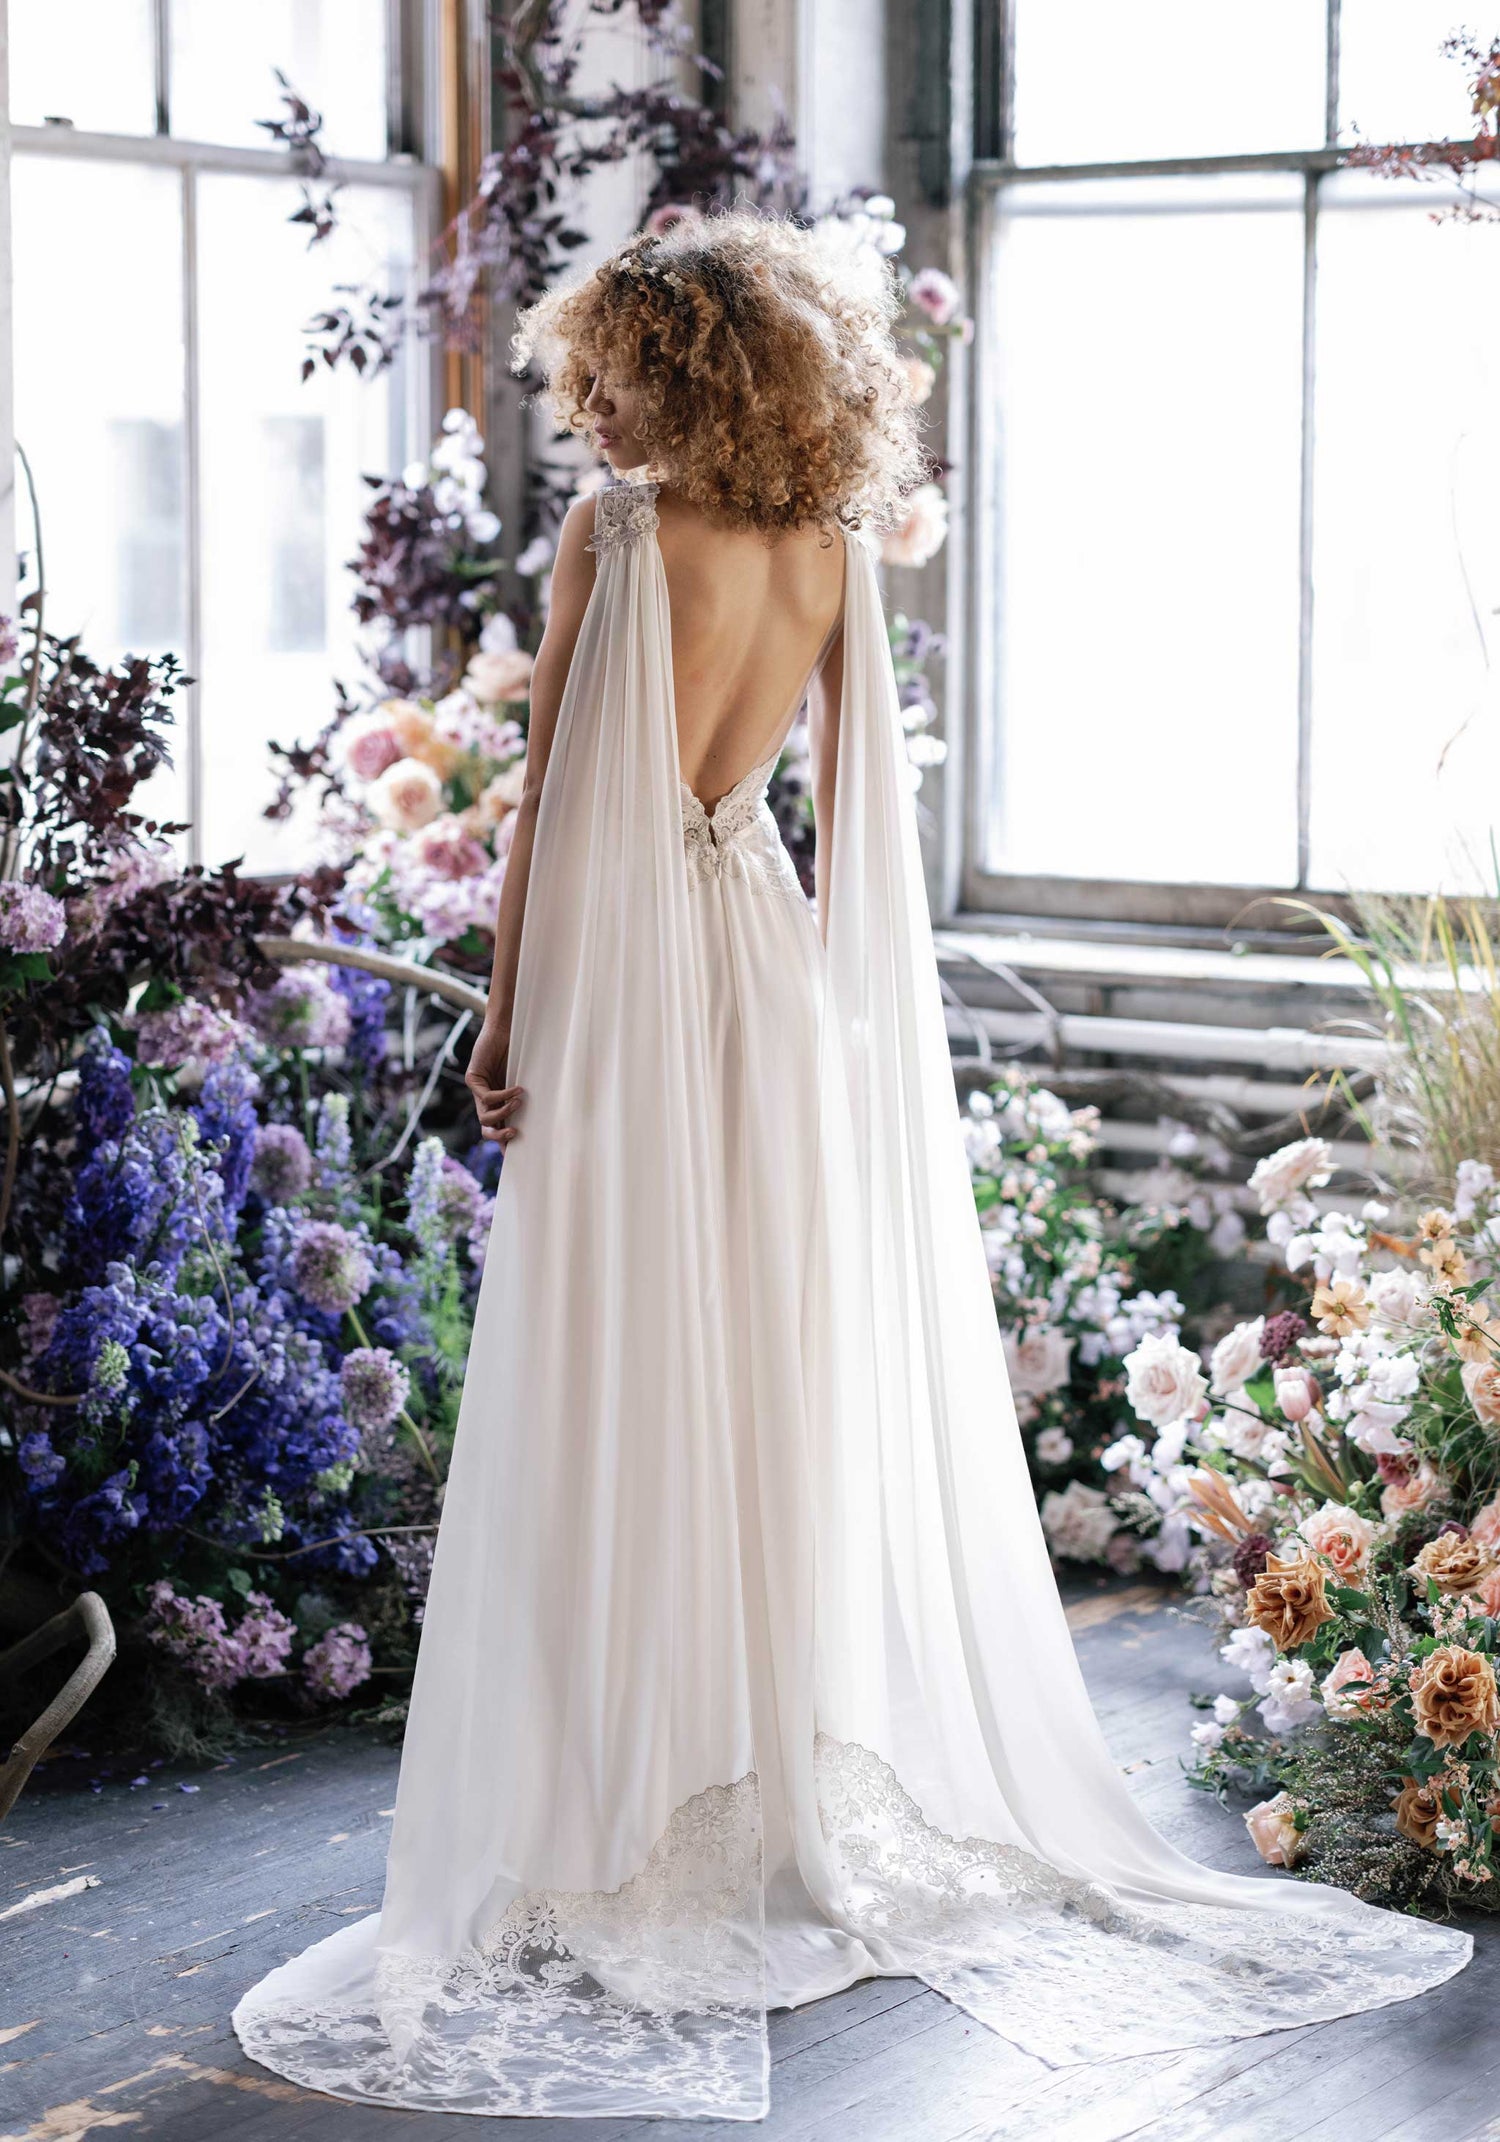 Amulet A-Line Wedding Dress with Open Back Claire Pettibone Design